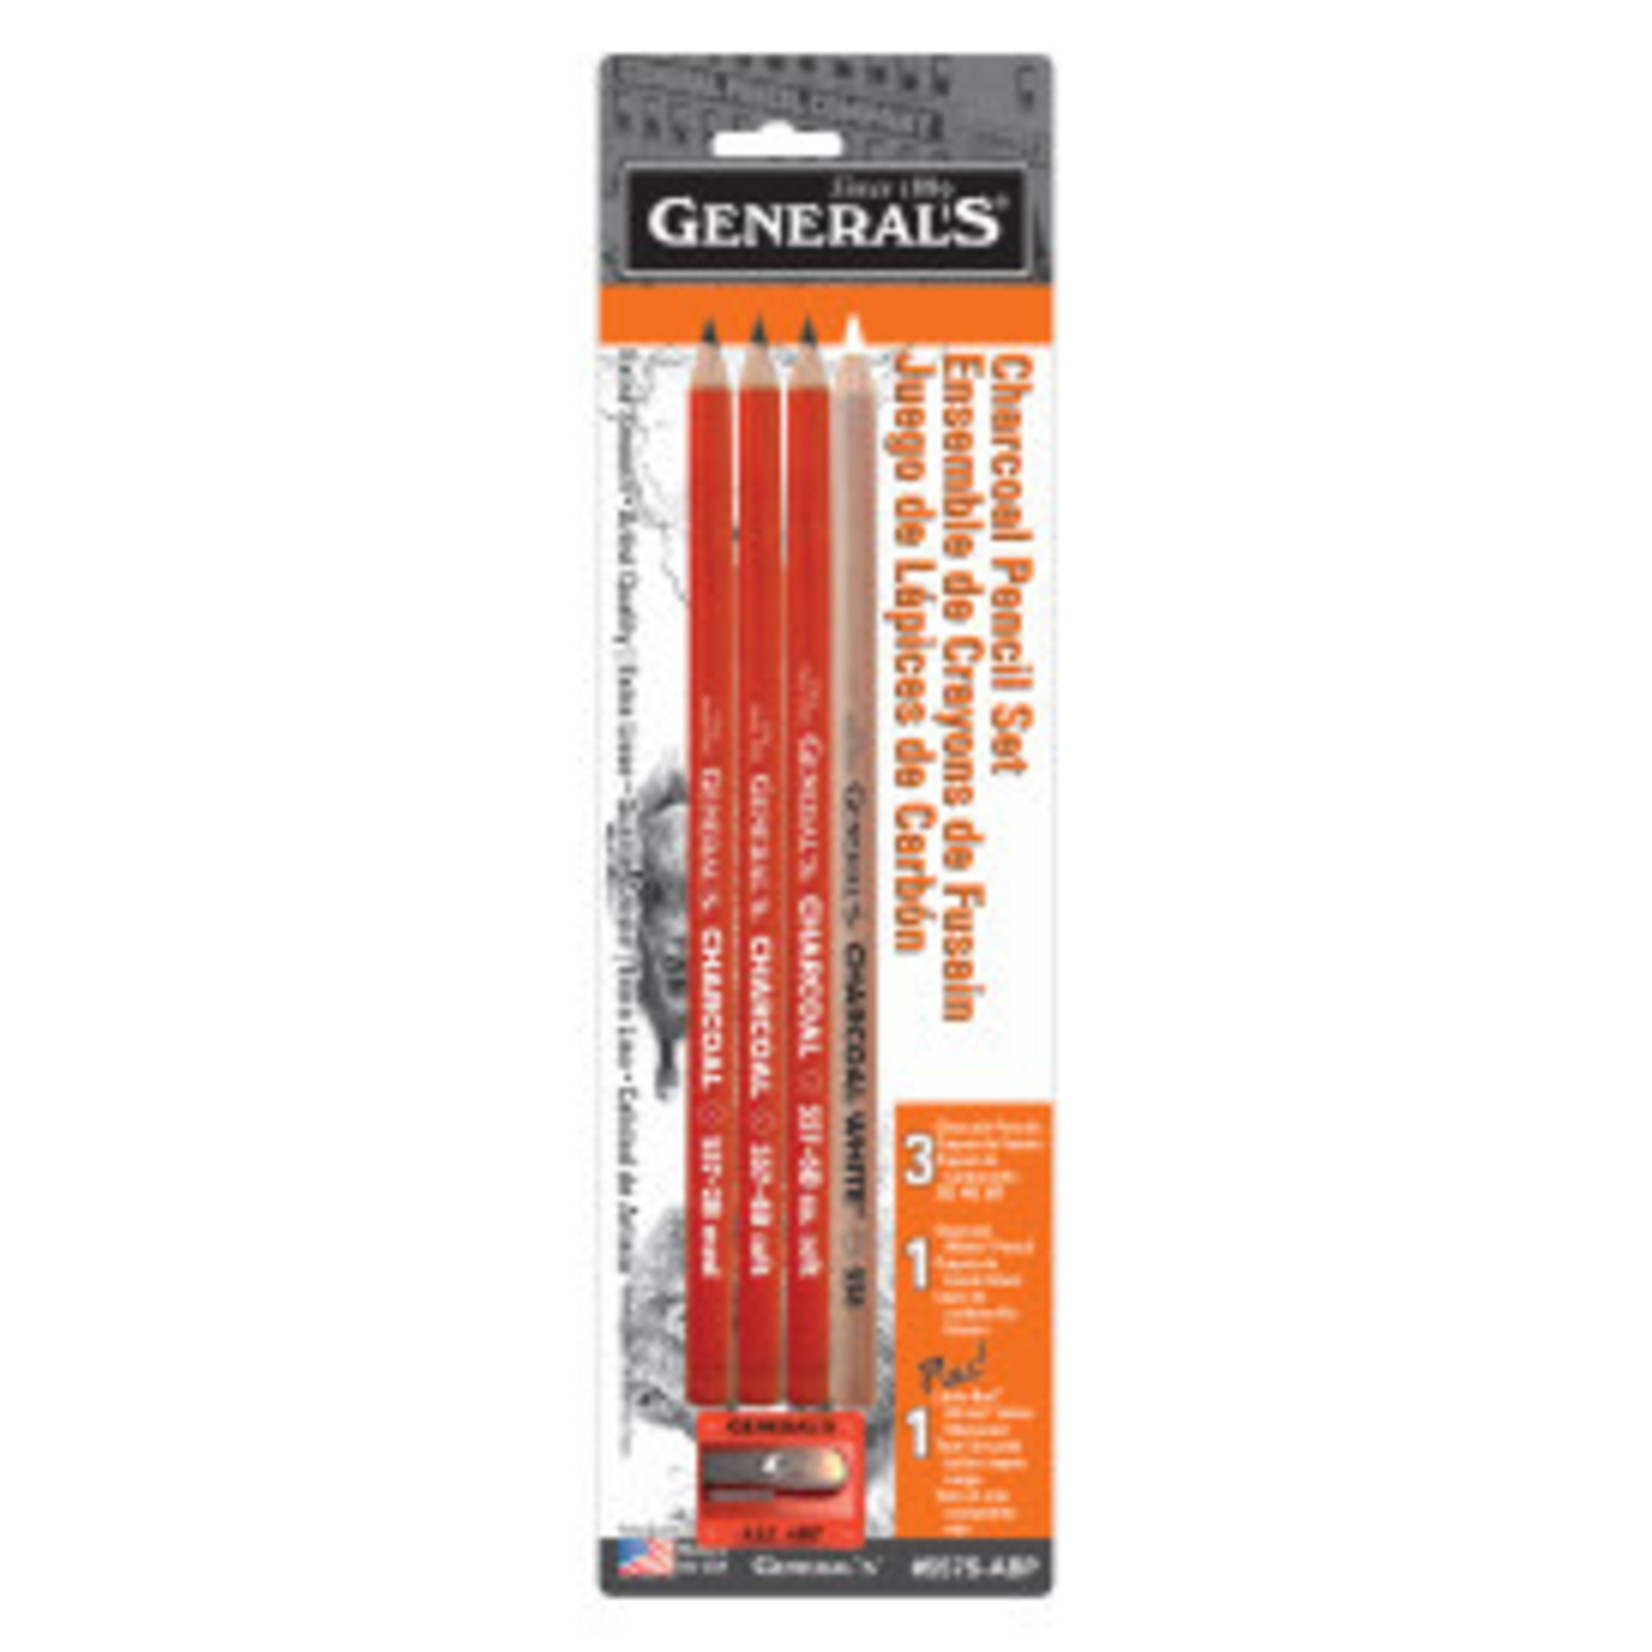 GENERAL'S CHARCOAL PENCIL SET/4 WITH SHARPENER